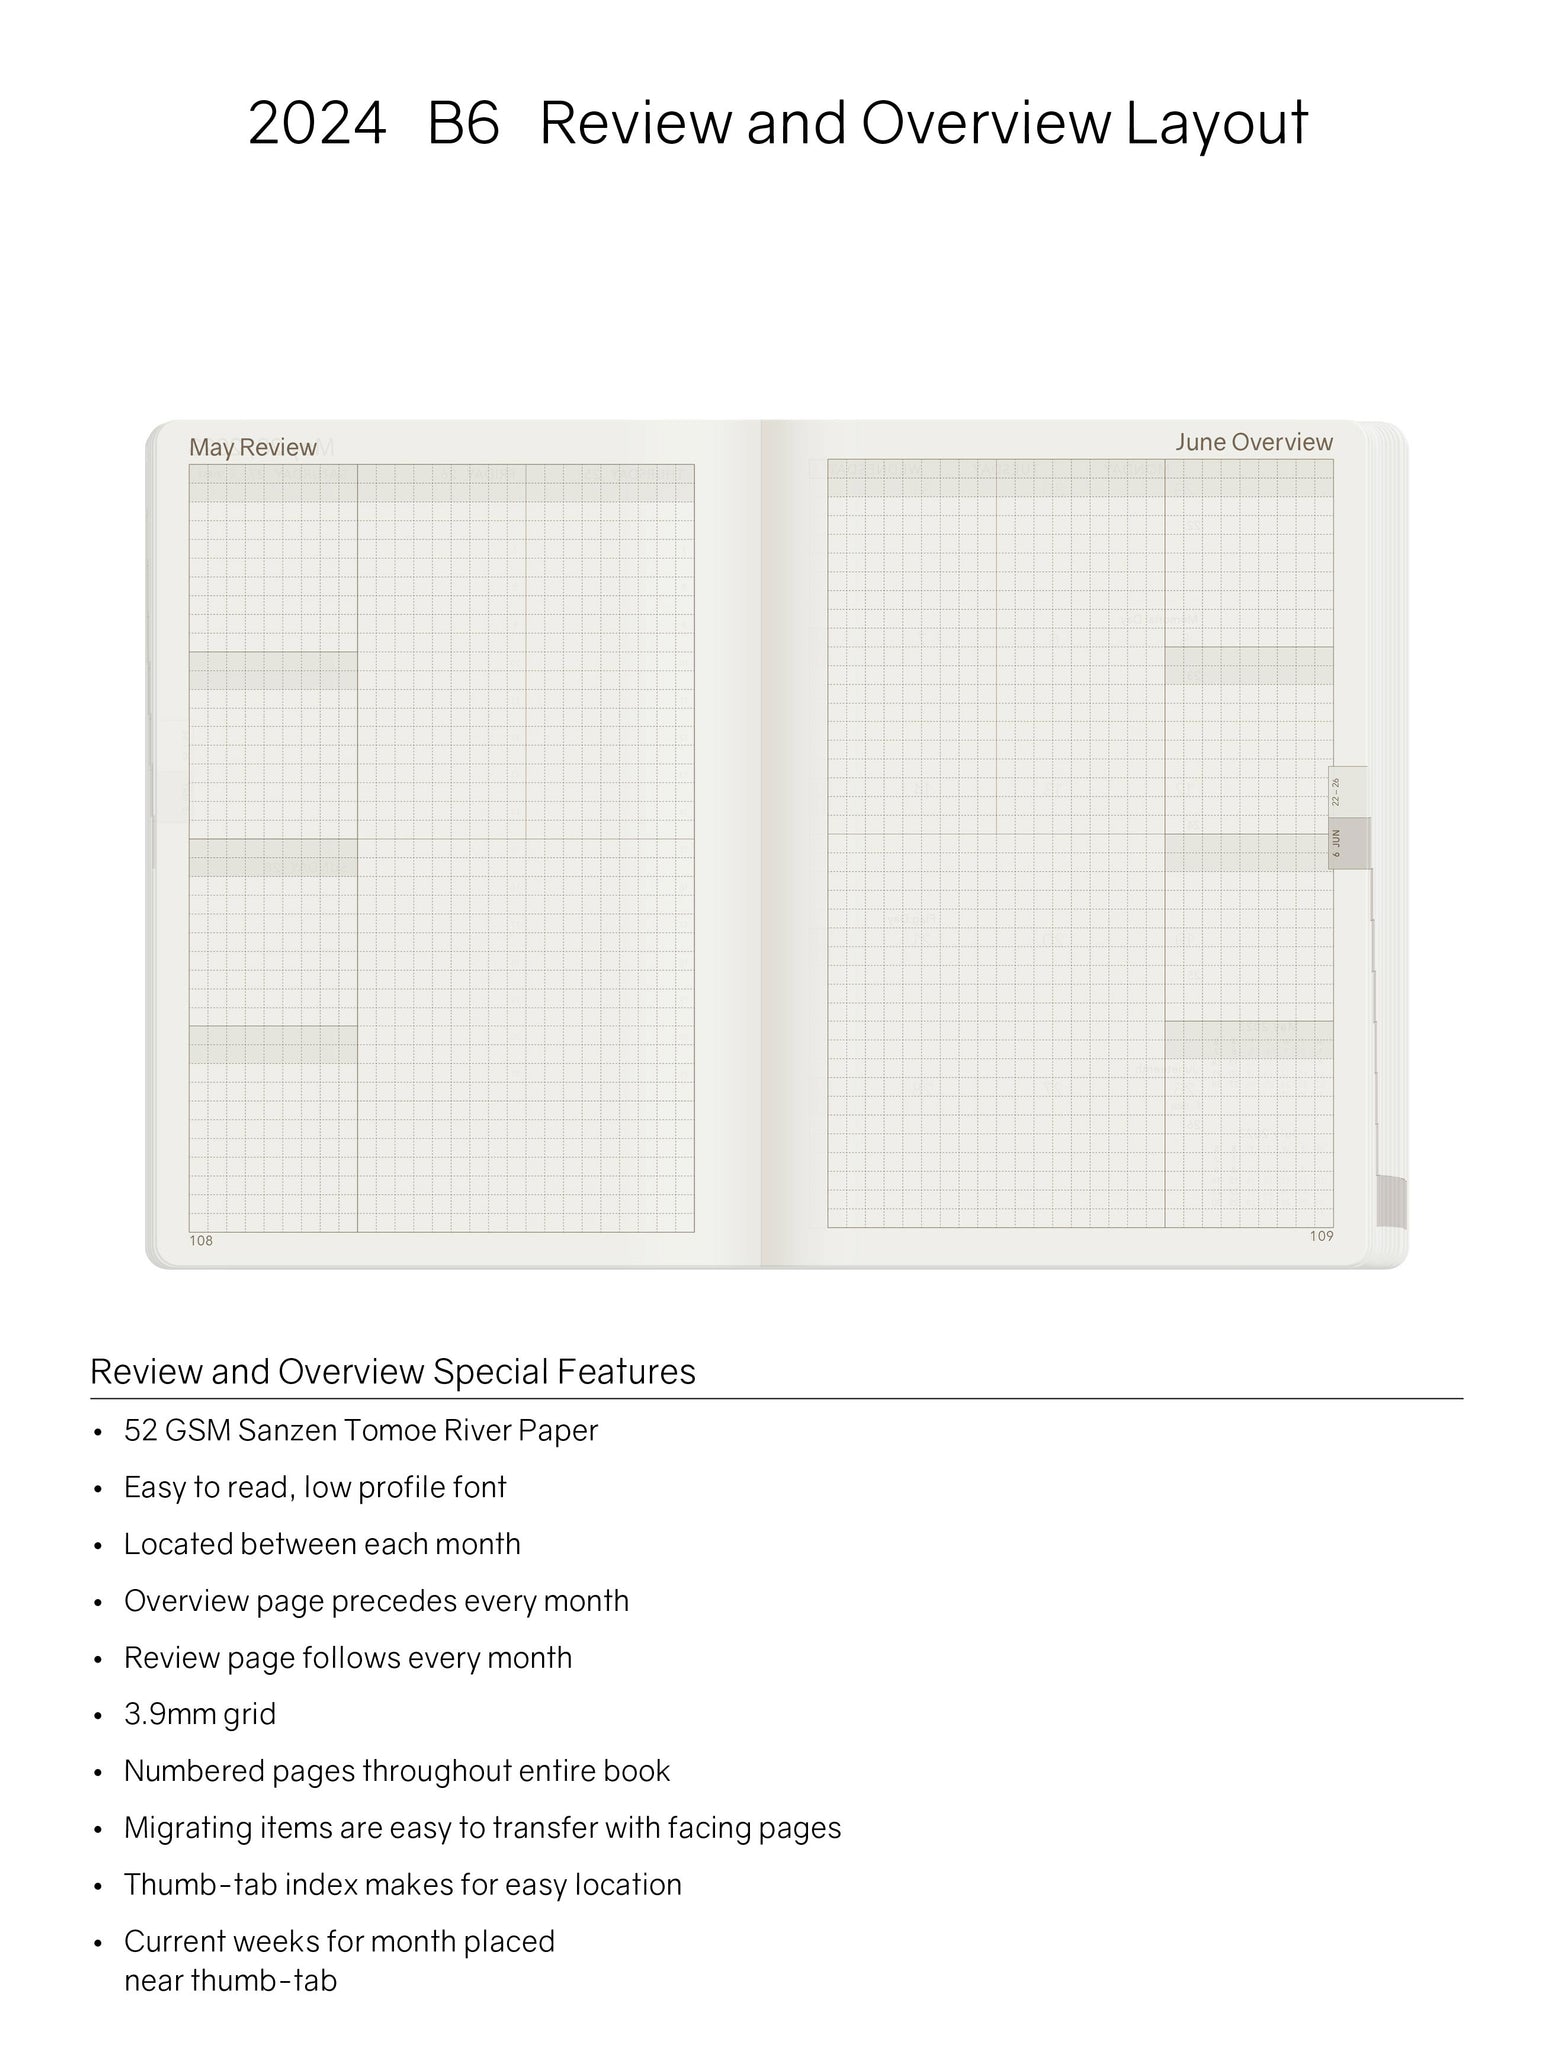 2024 B6 Weekly Planner - 52gsm Tomoe River Paper (All in One)